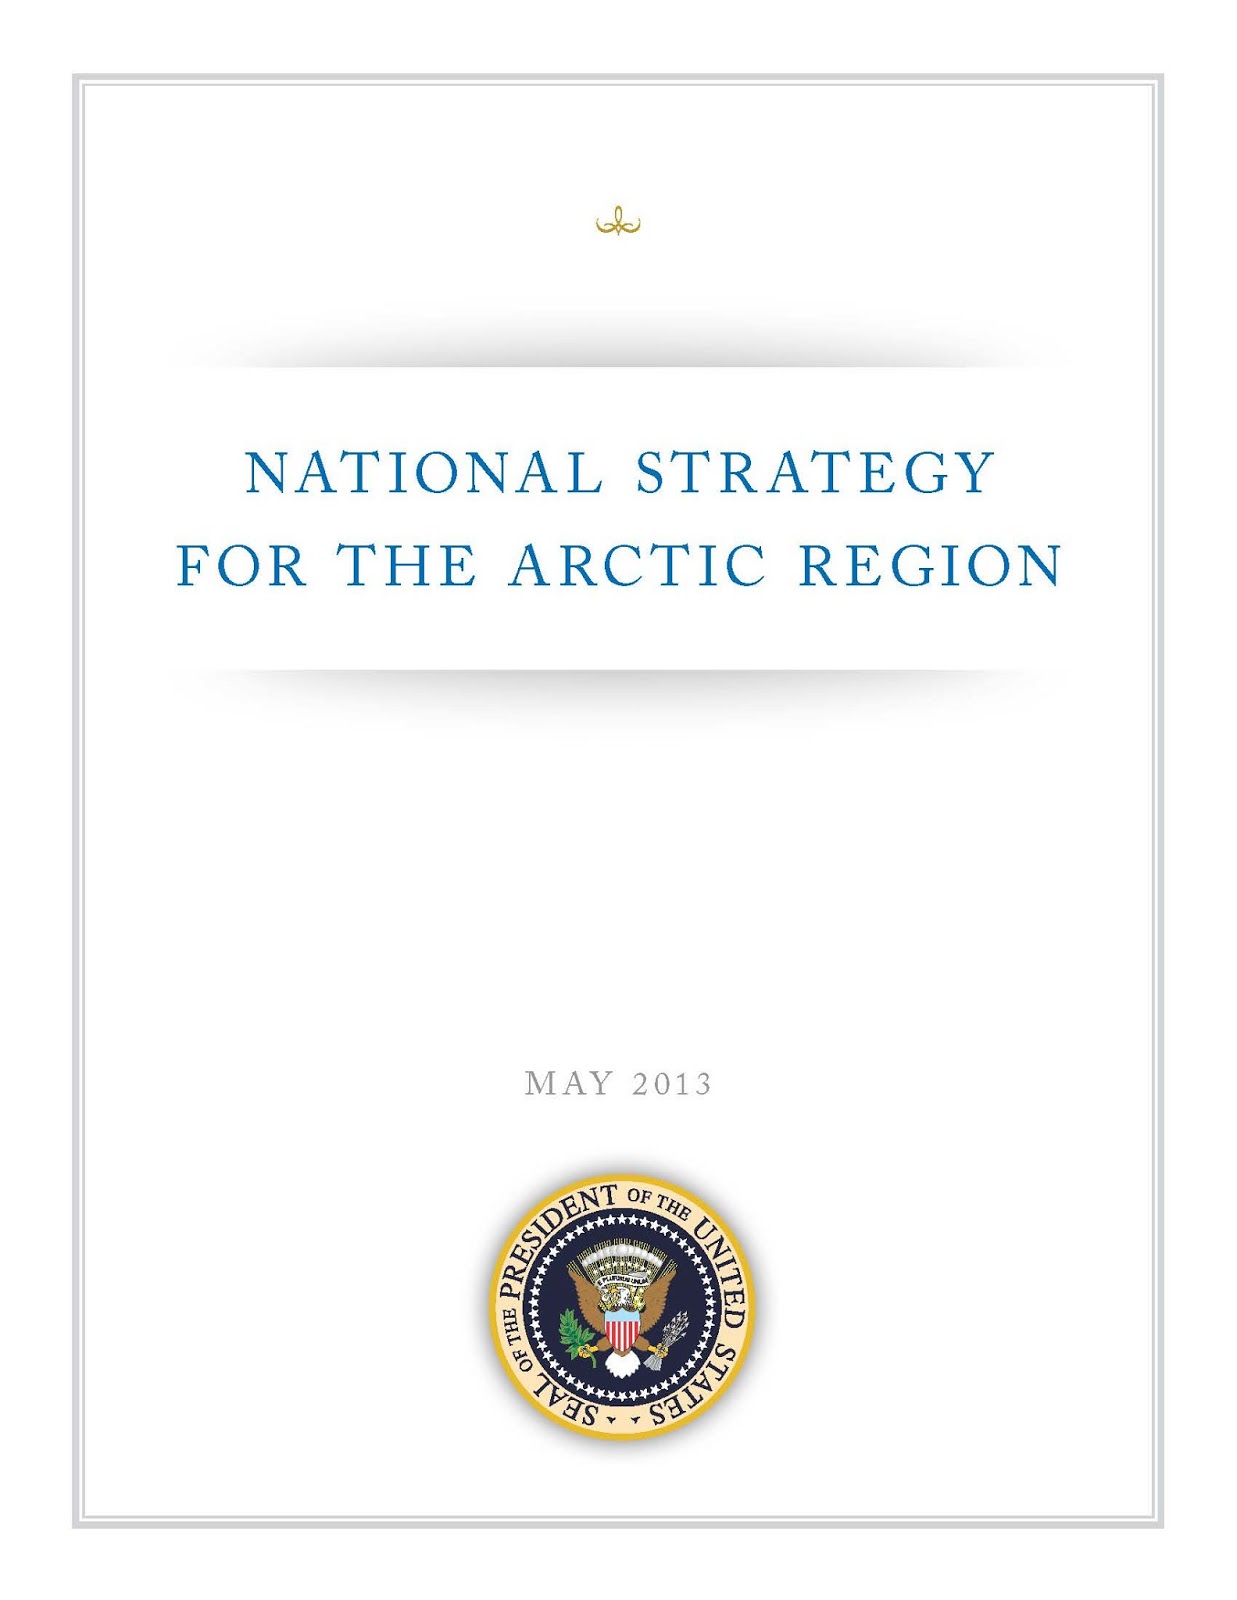 Front page of US National Strategy for the Arctic region